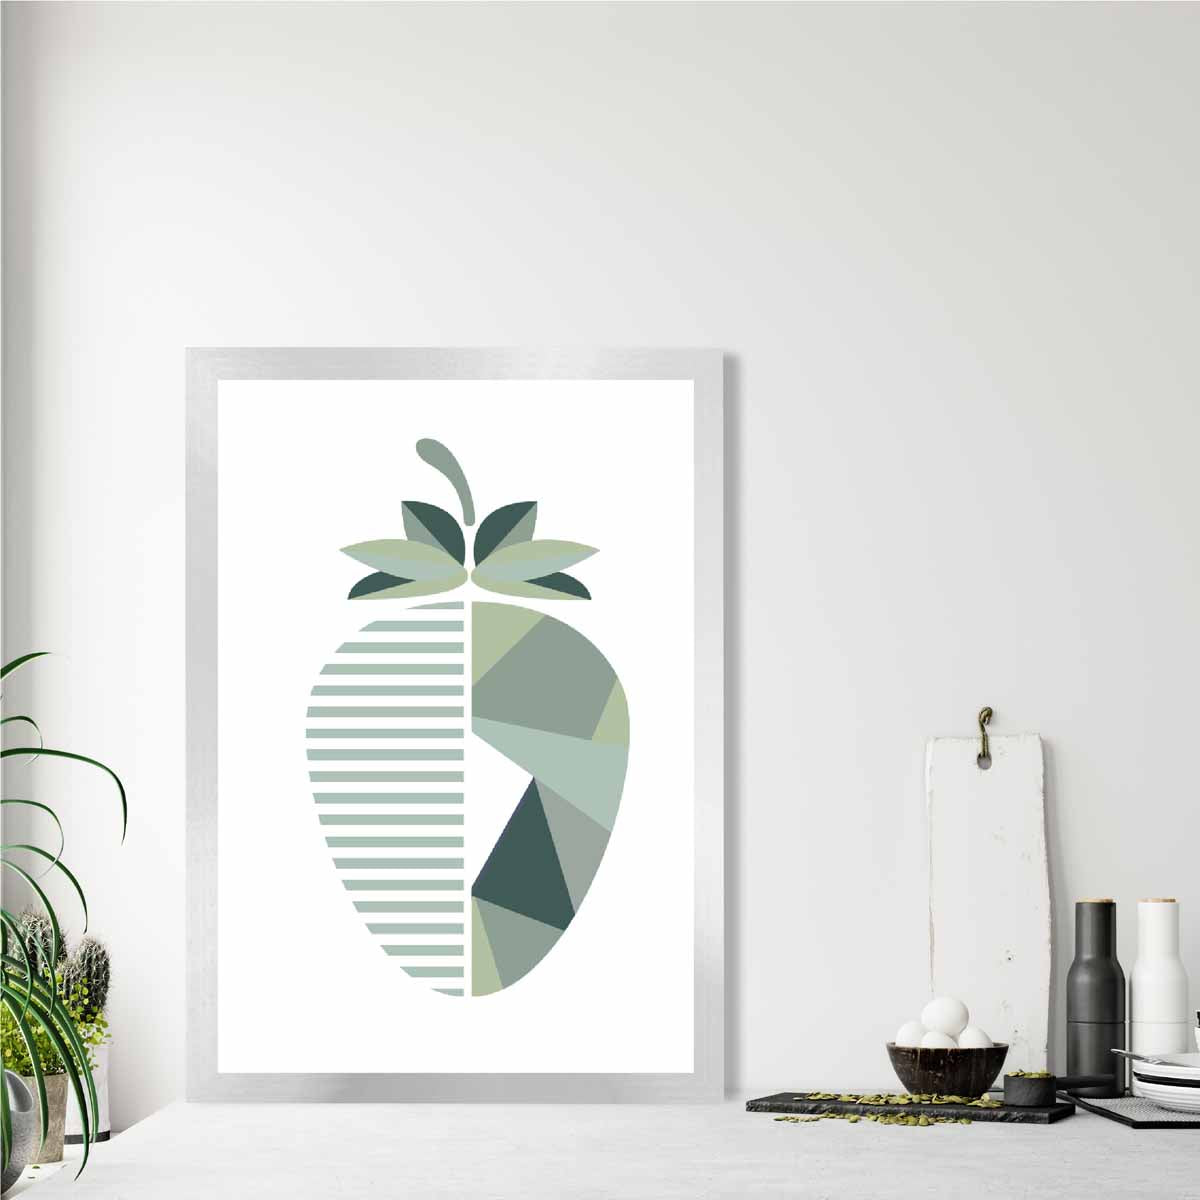 Geometric Fruit Poster of Strawberry in Sage green